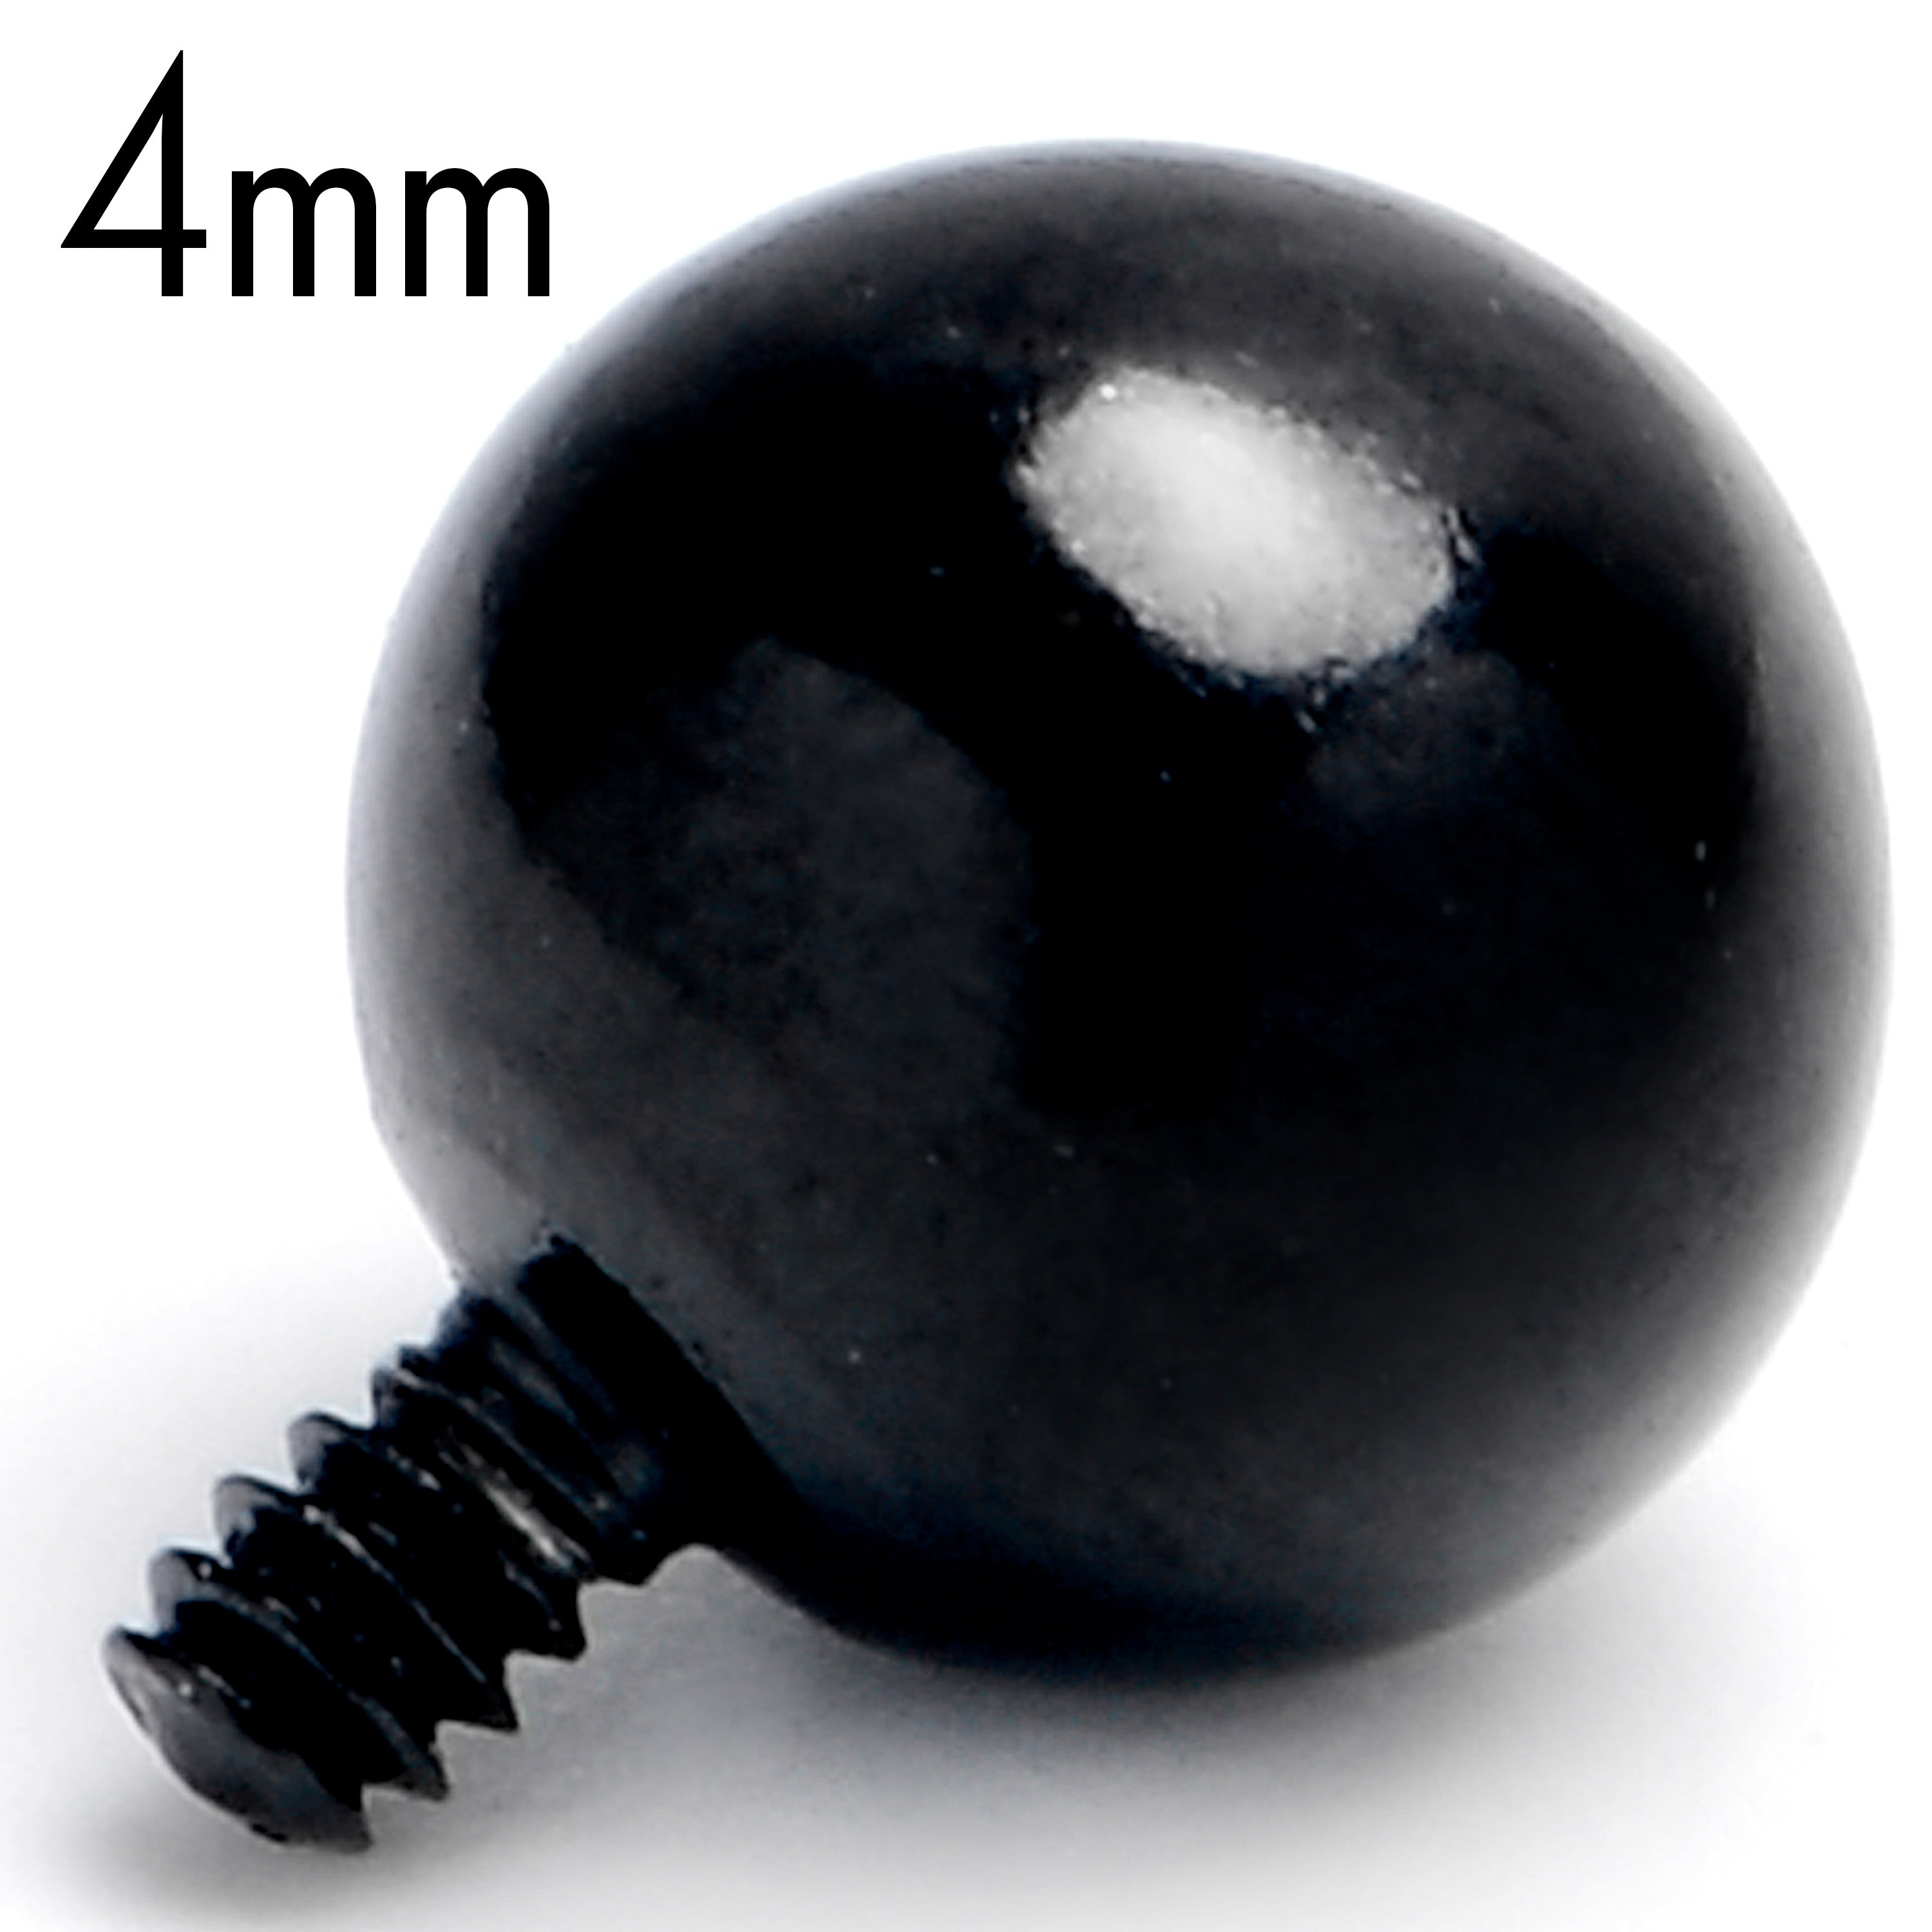 16 Gauge 4mm Black Replacement Ball End Internally Threaded Jewelry